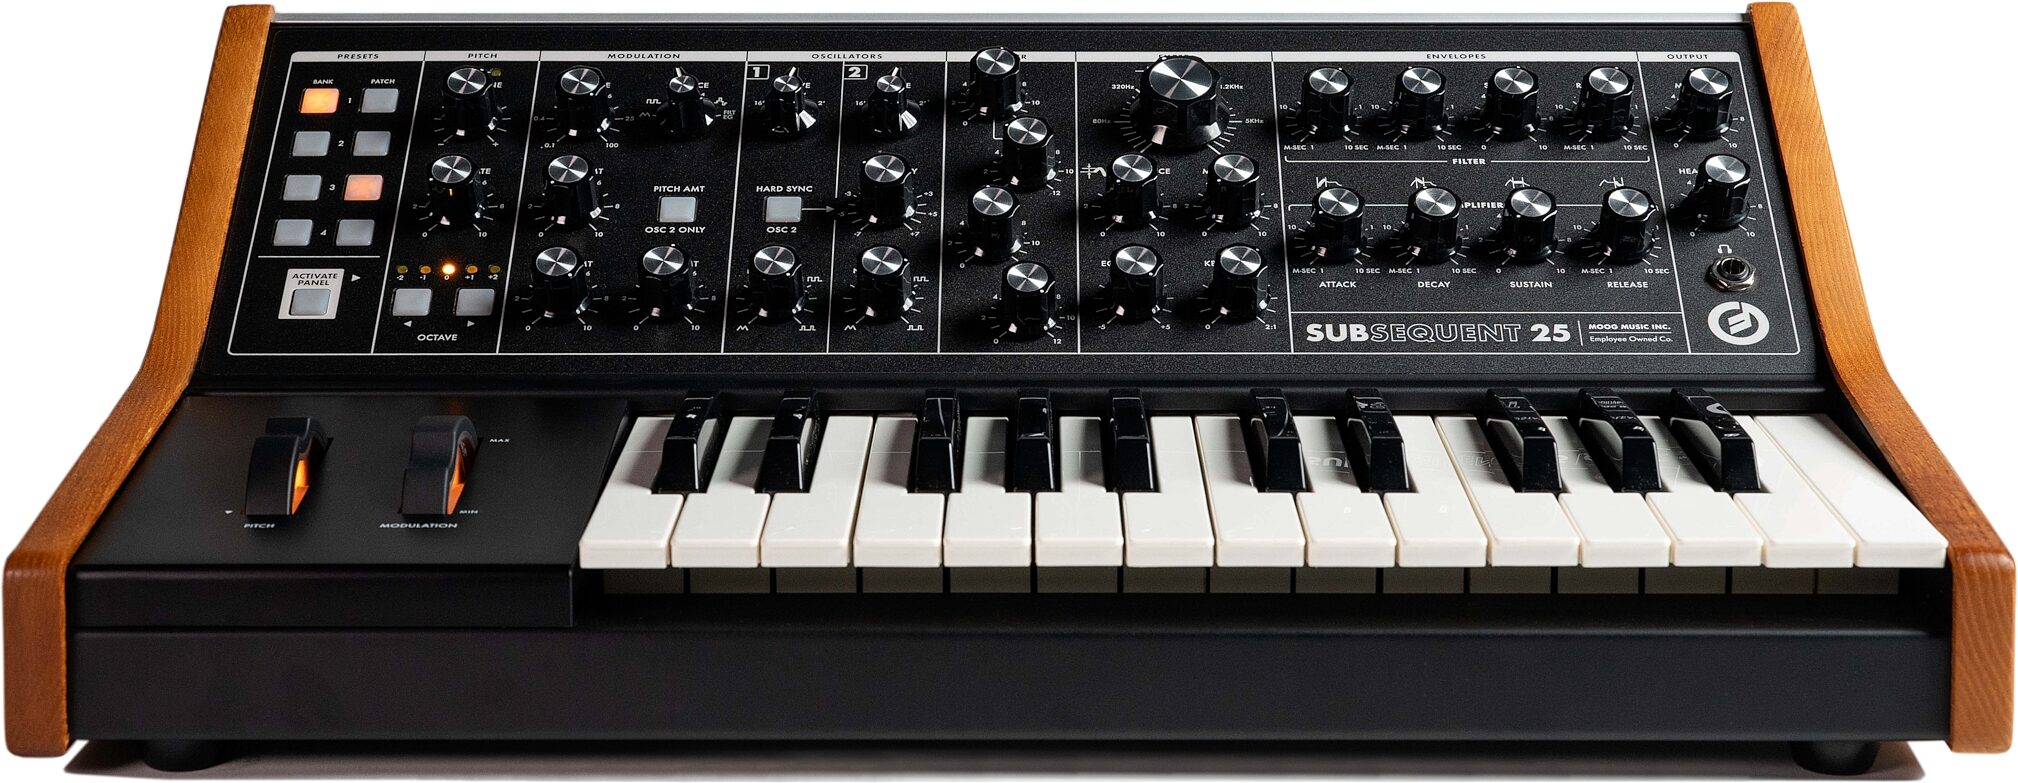 Moog Subsequent 25 Analog Keyboard Synthesizer | zZounds